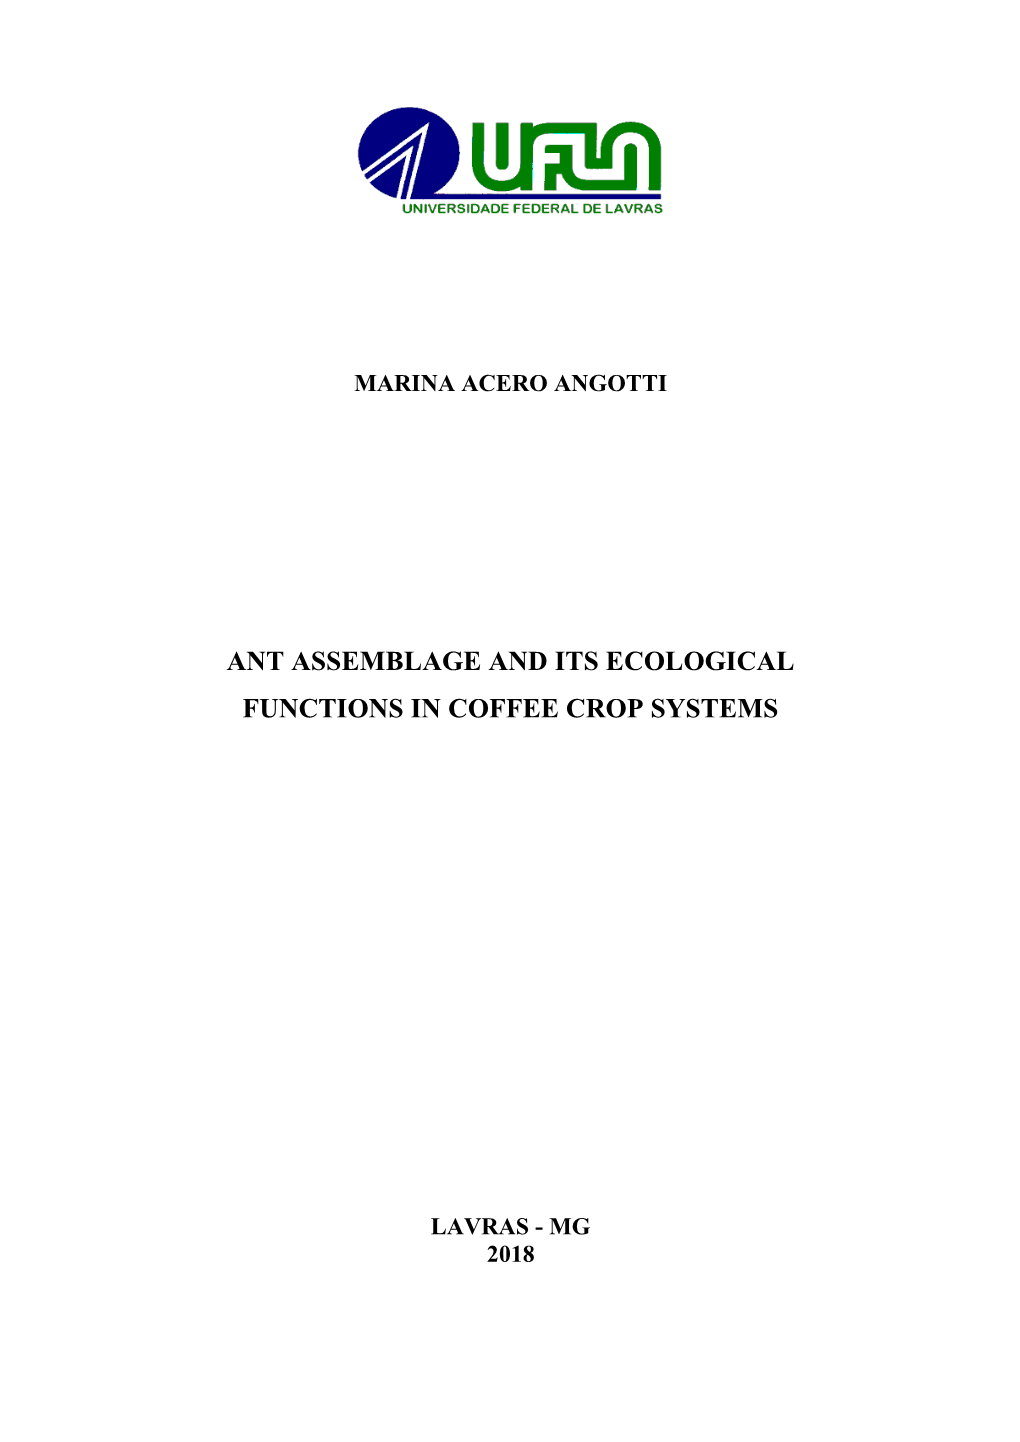 Ant Assemblage and Its Ecological Functions in Coffee Crop Systems